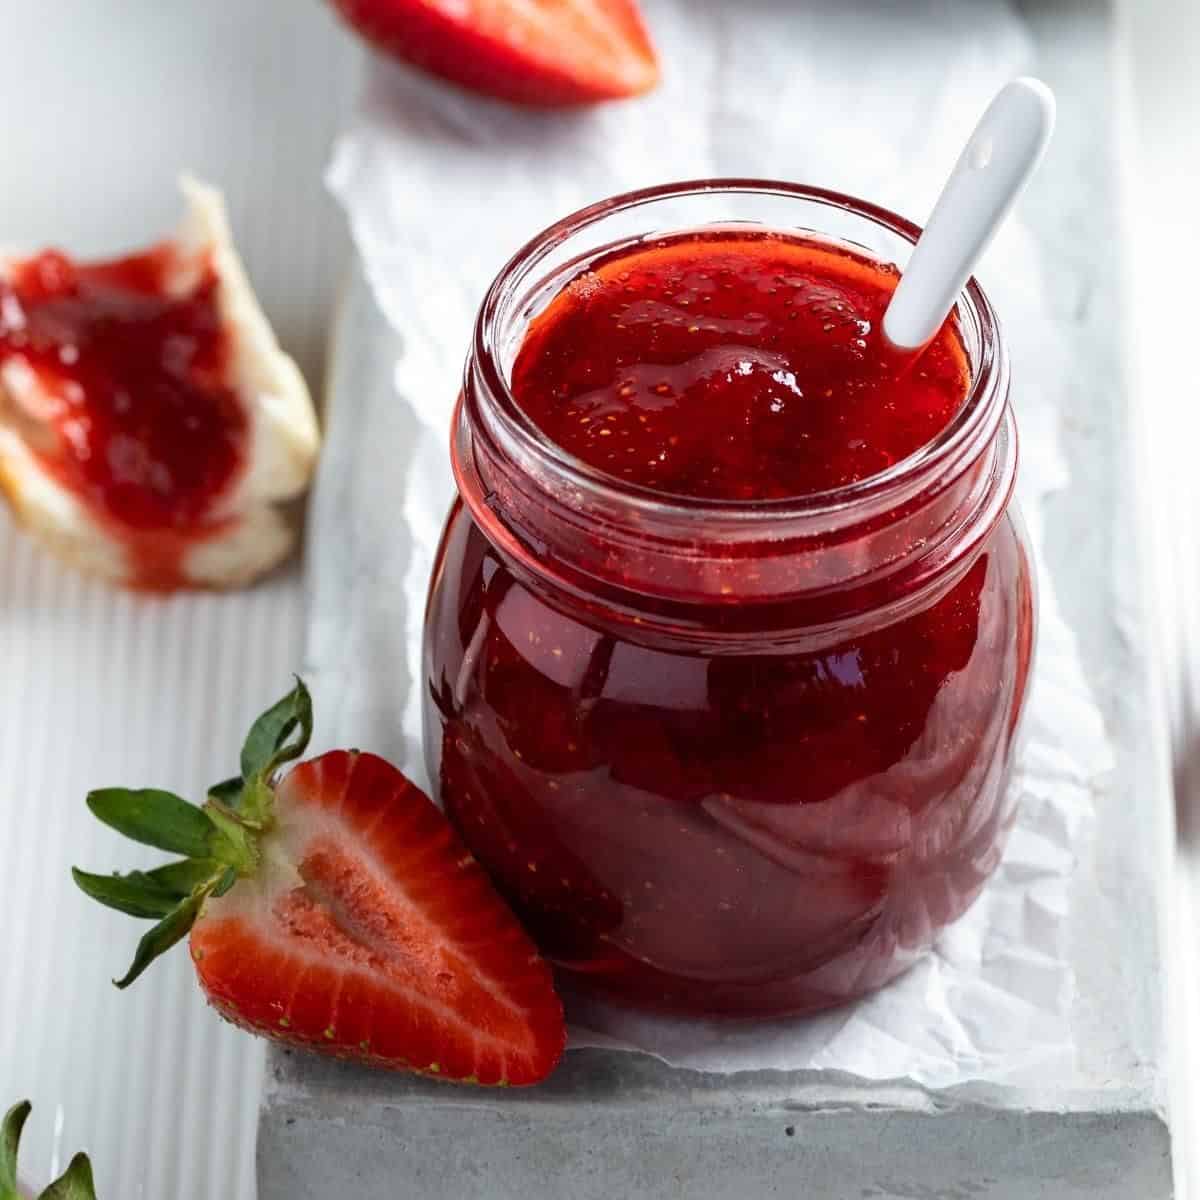 How To Open A Jar of Preserves 